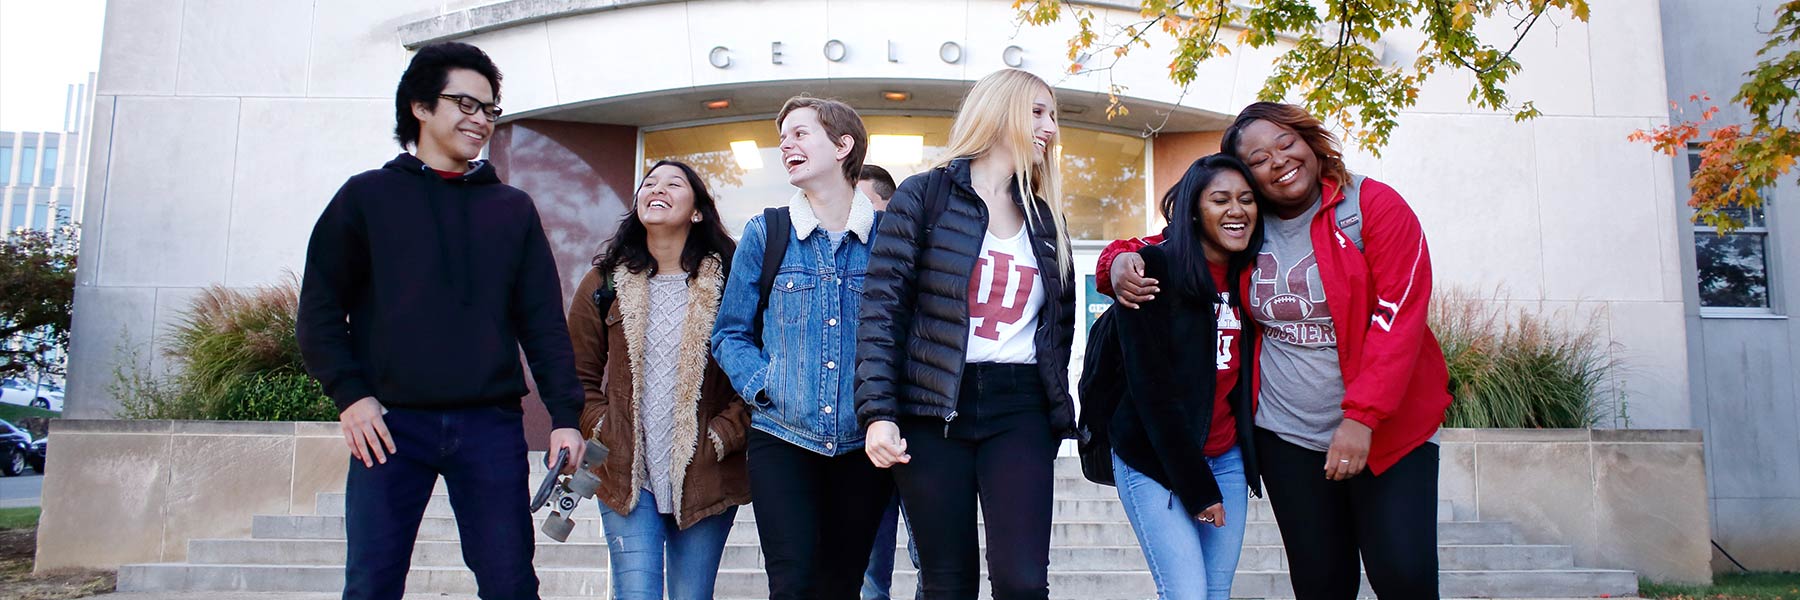 A group of students walks in front of the Geology building.